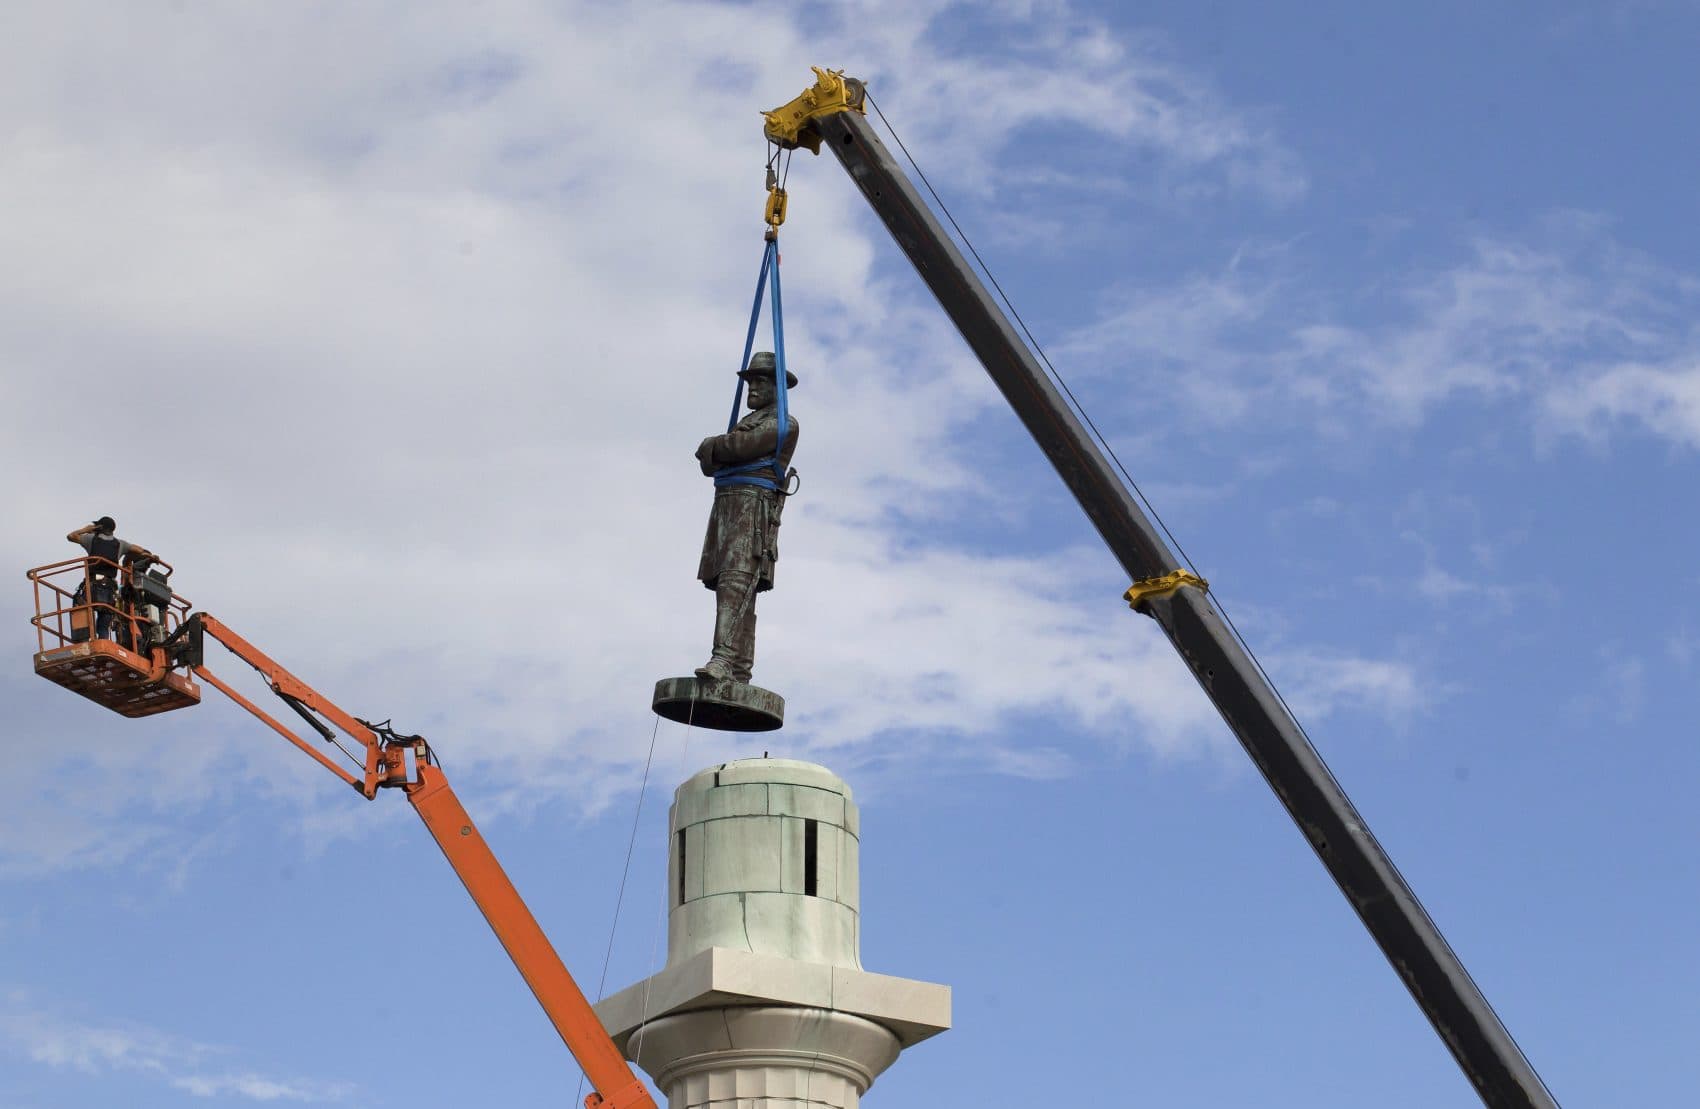 Good for news for New Orleans. But how should we deal with such sinful remainders of slavery’s past in the celebrated precincts of Boston? asks Kevin C. Peterson. Pictured: A statue of Confederate General Robert E. Lee is removed from Lee Circle Friday, May 19, 2017, in New Orleans. (Scott Threlkeld/AP)